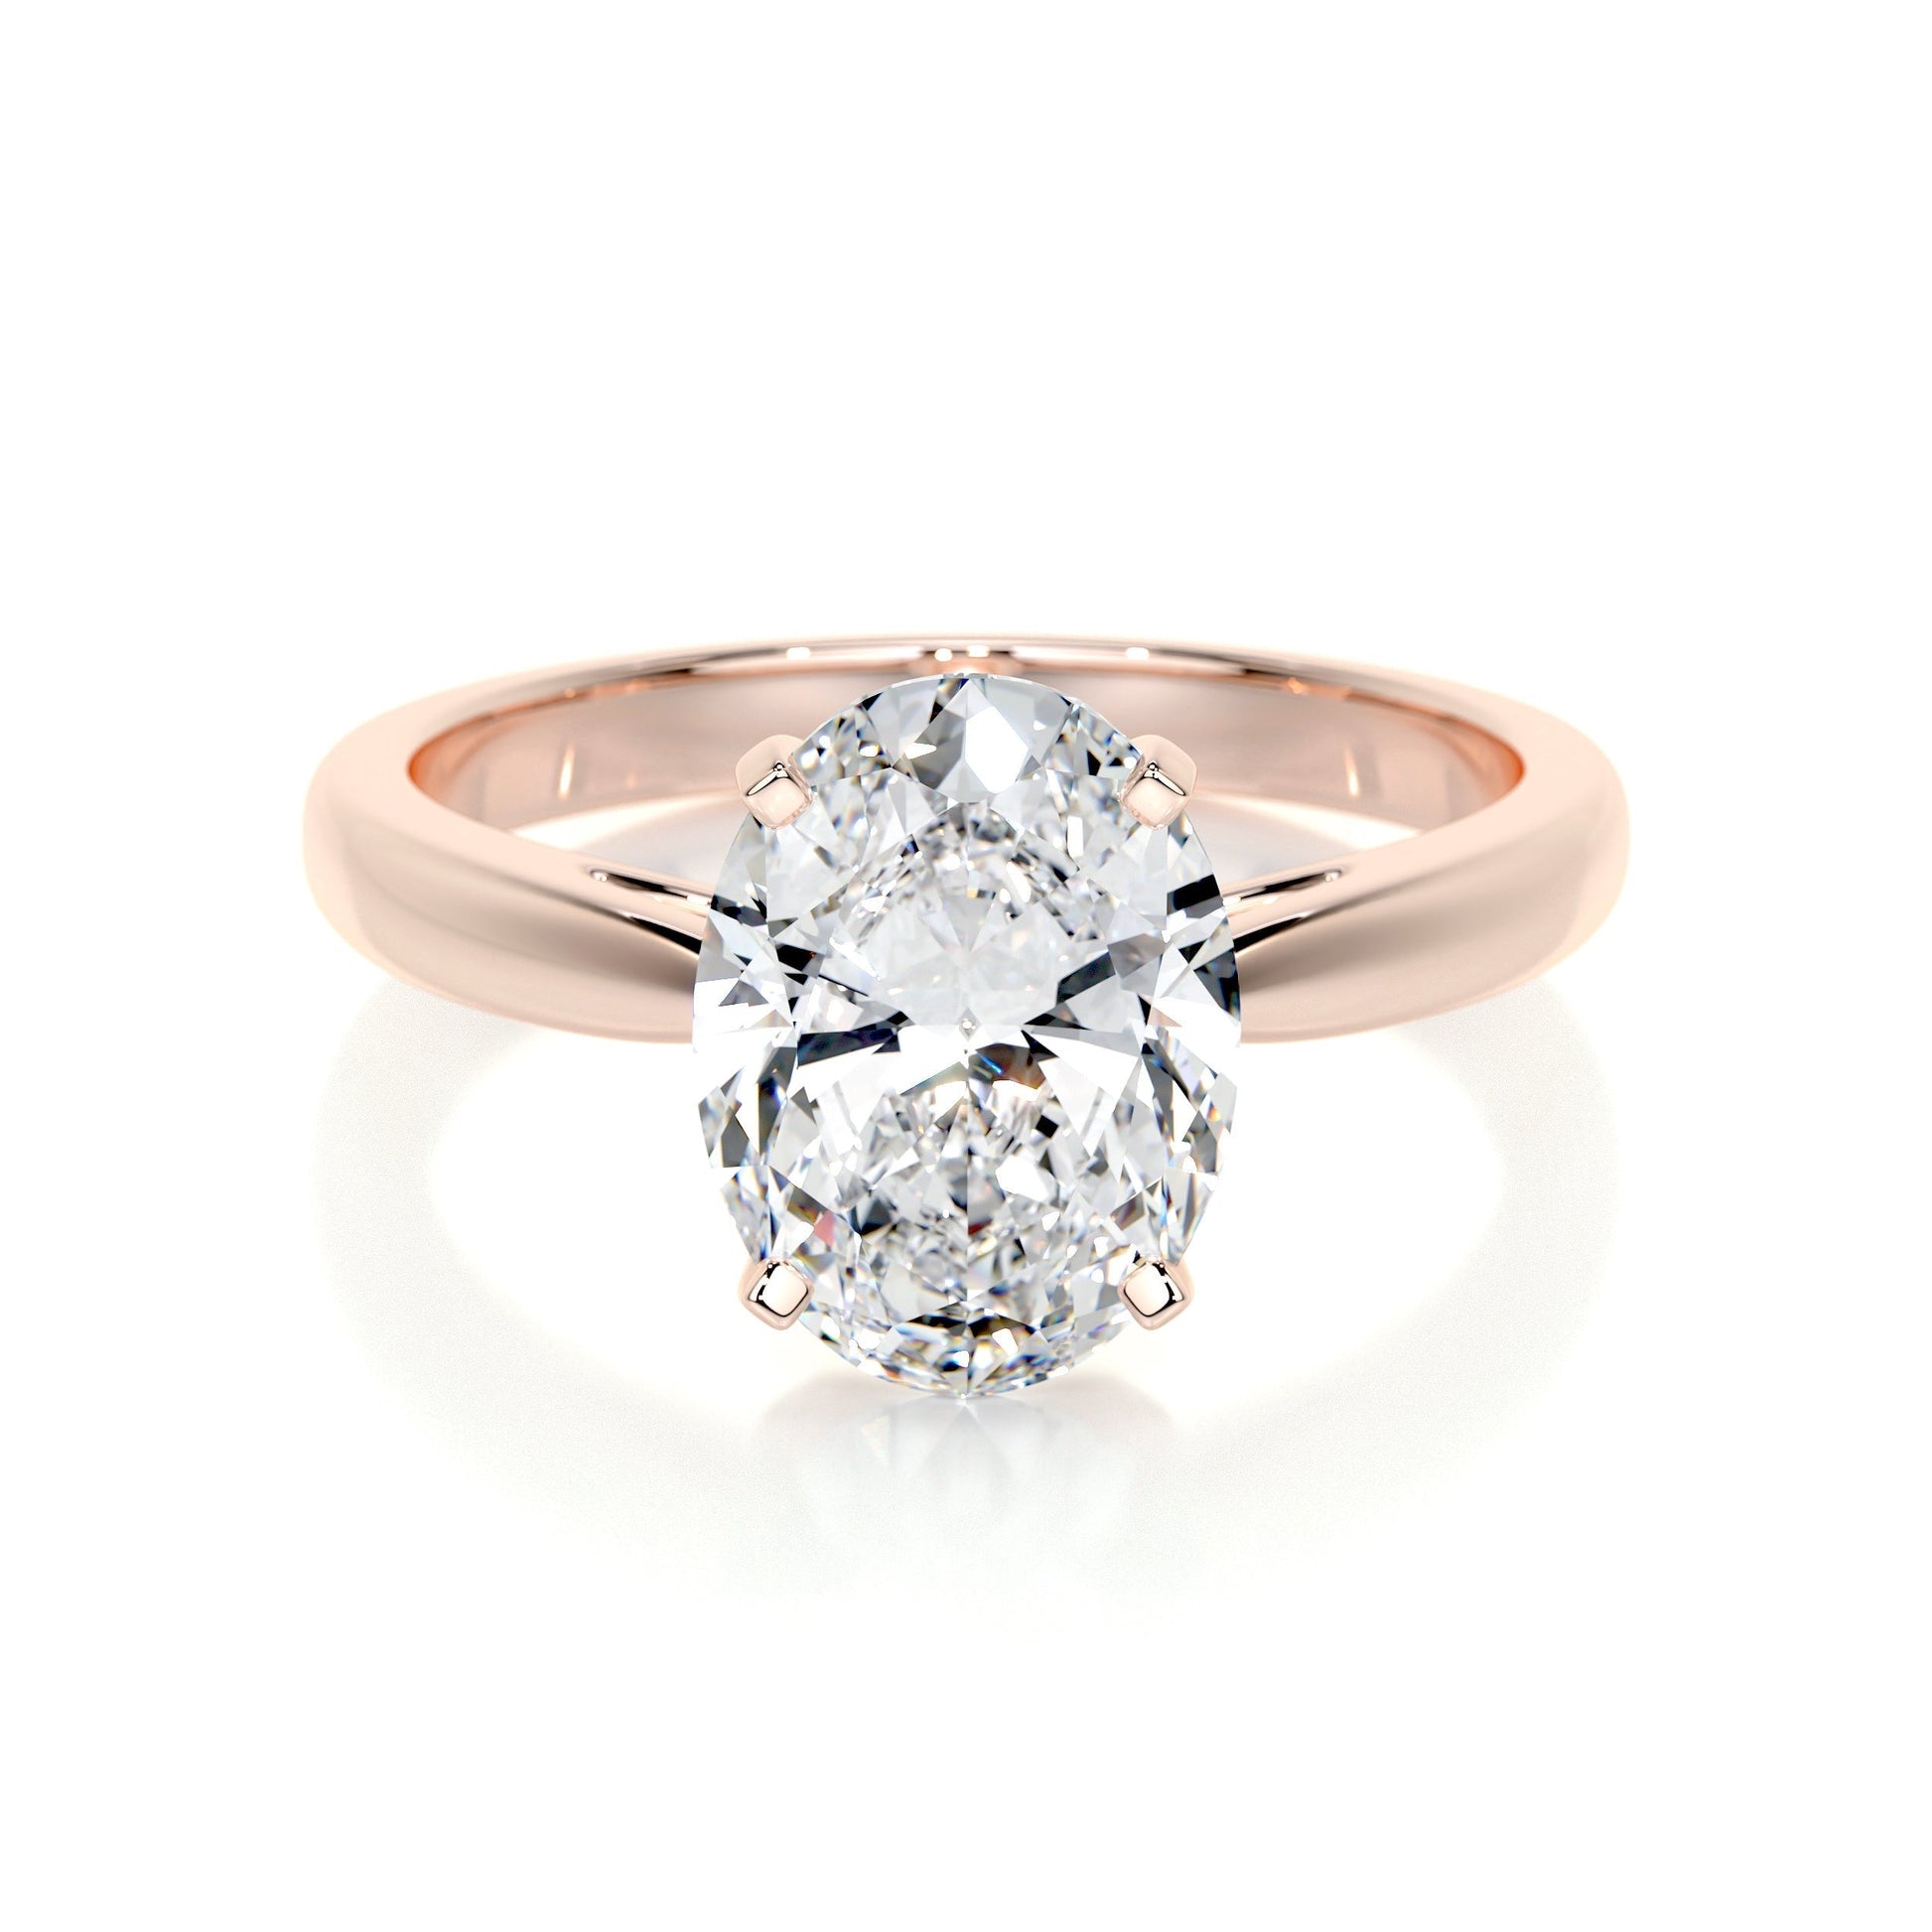 2.0 CT Oval Solitaire CVD G/VS2 Diamond Engagement Ring 11